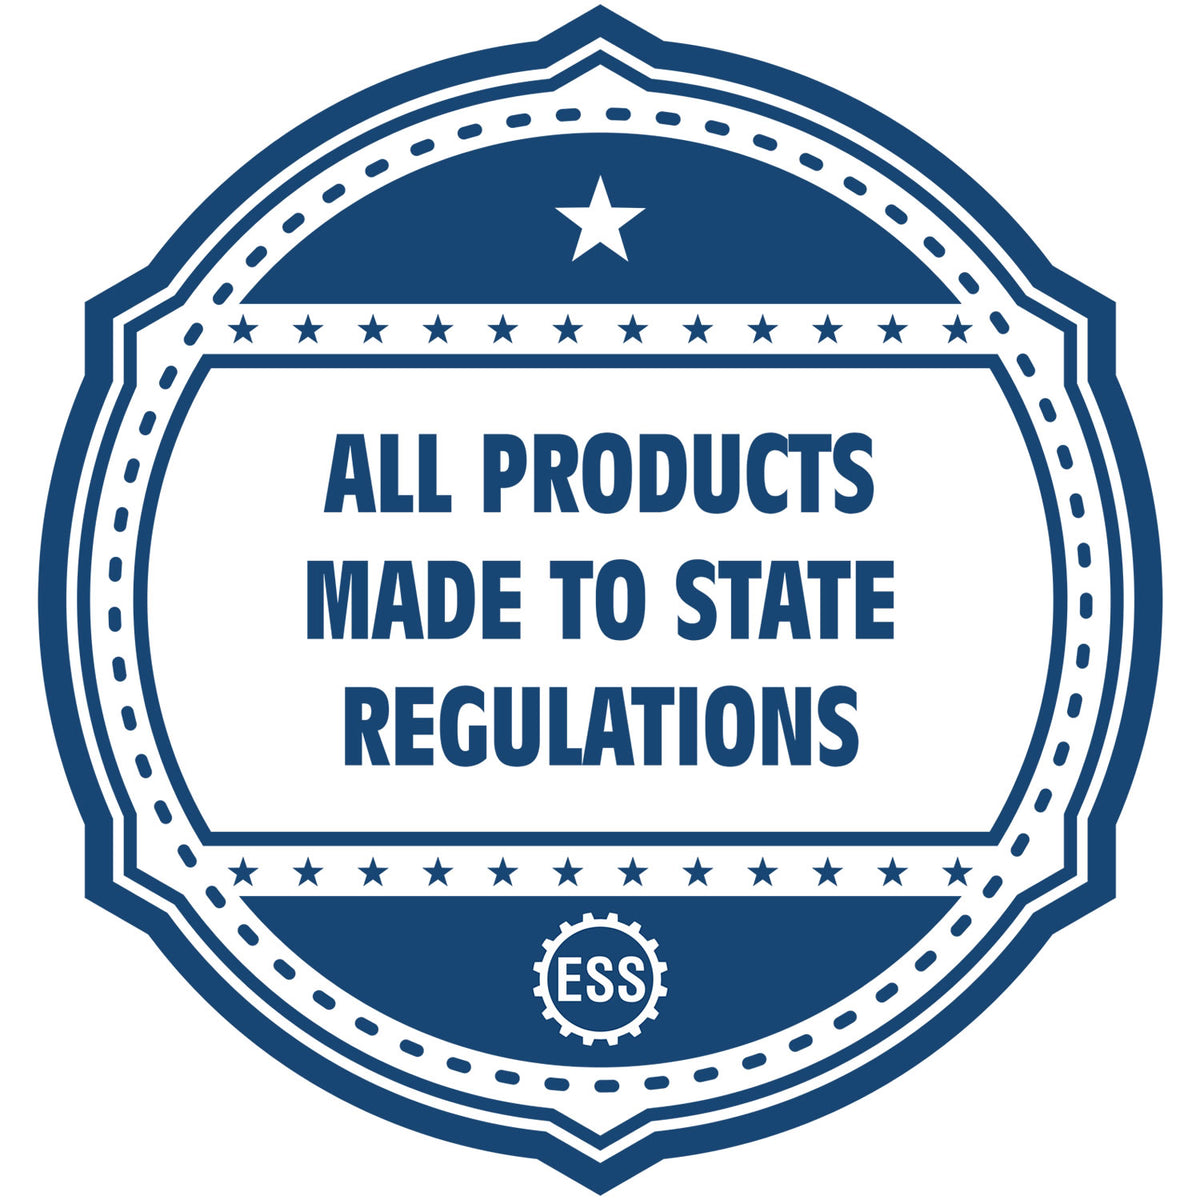 An icon or badge element for the Digital Kansas PE Stamp and Electronic Seal for Kansas Engineer showing that this product is made in compliance with state regulations.